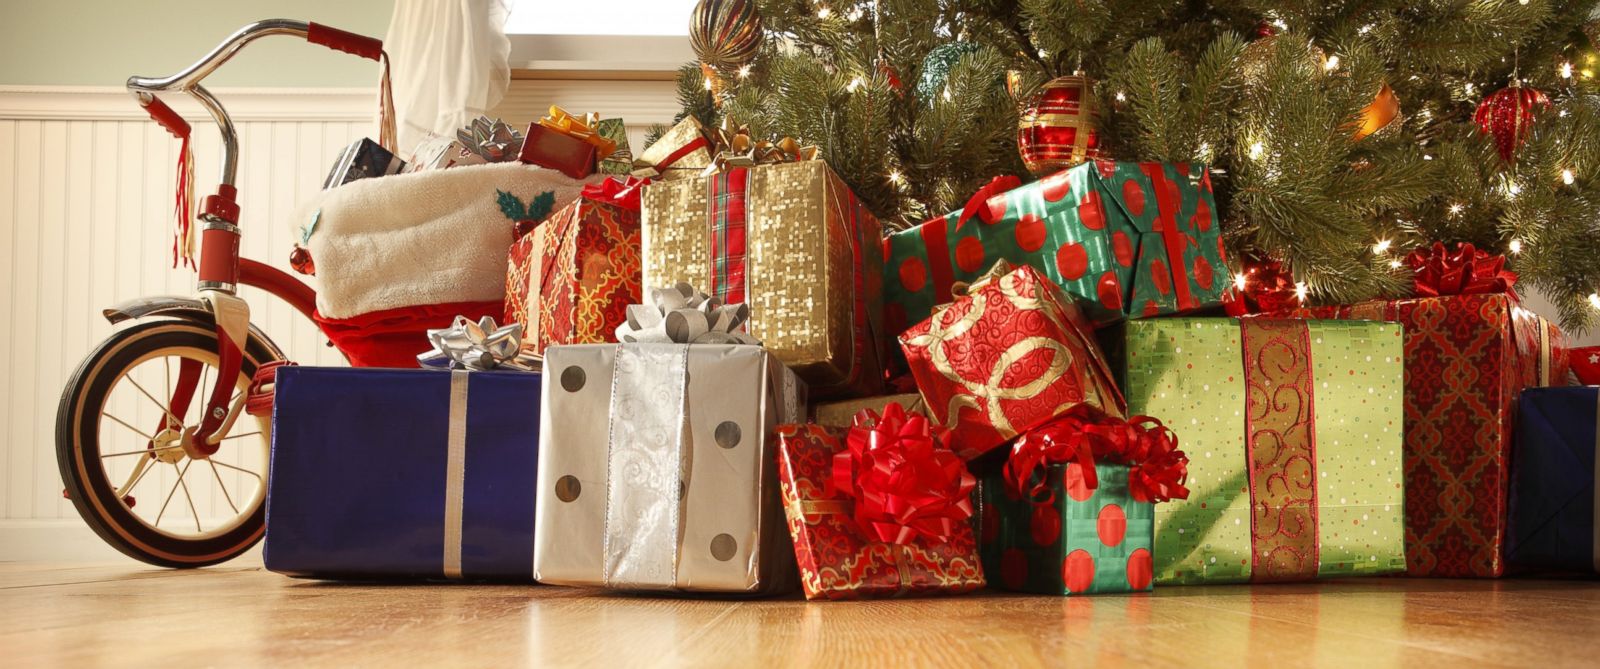 PHOTO: Many presents are seen under a Christmas tree in this stock photo.